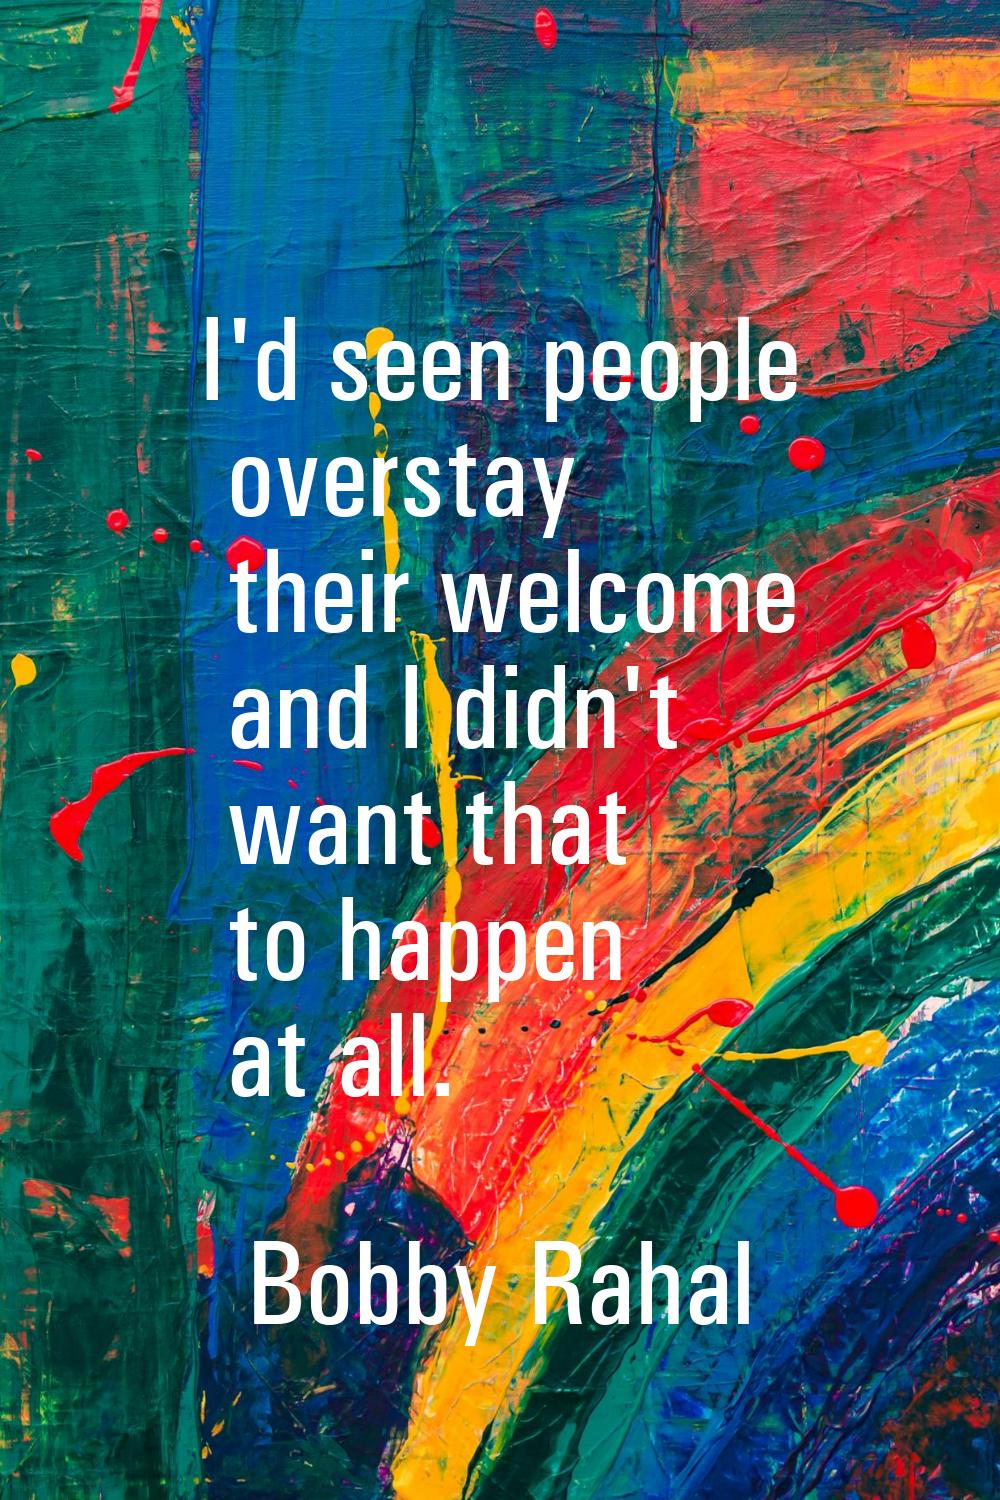 I'd seen people overstay their welcome and I didn't want that to happen at all.